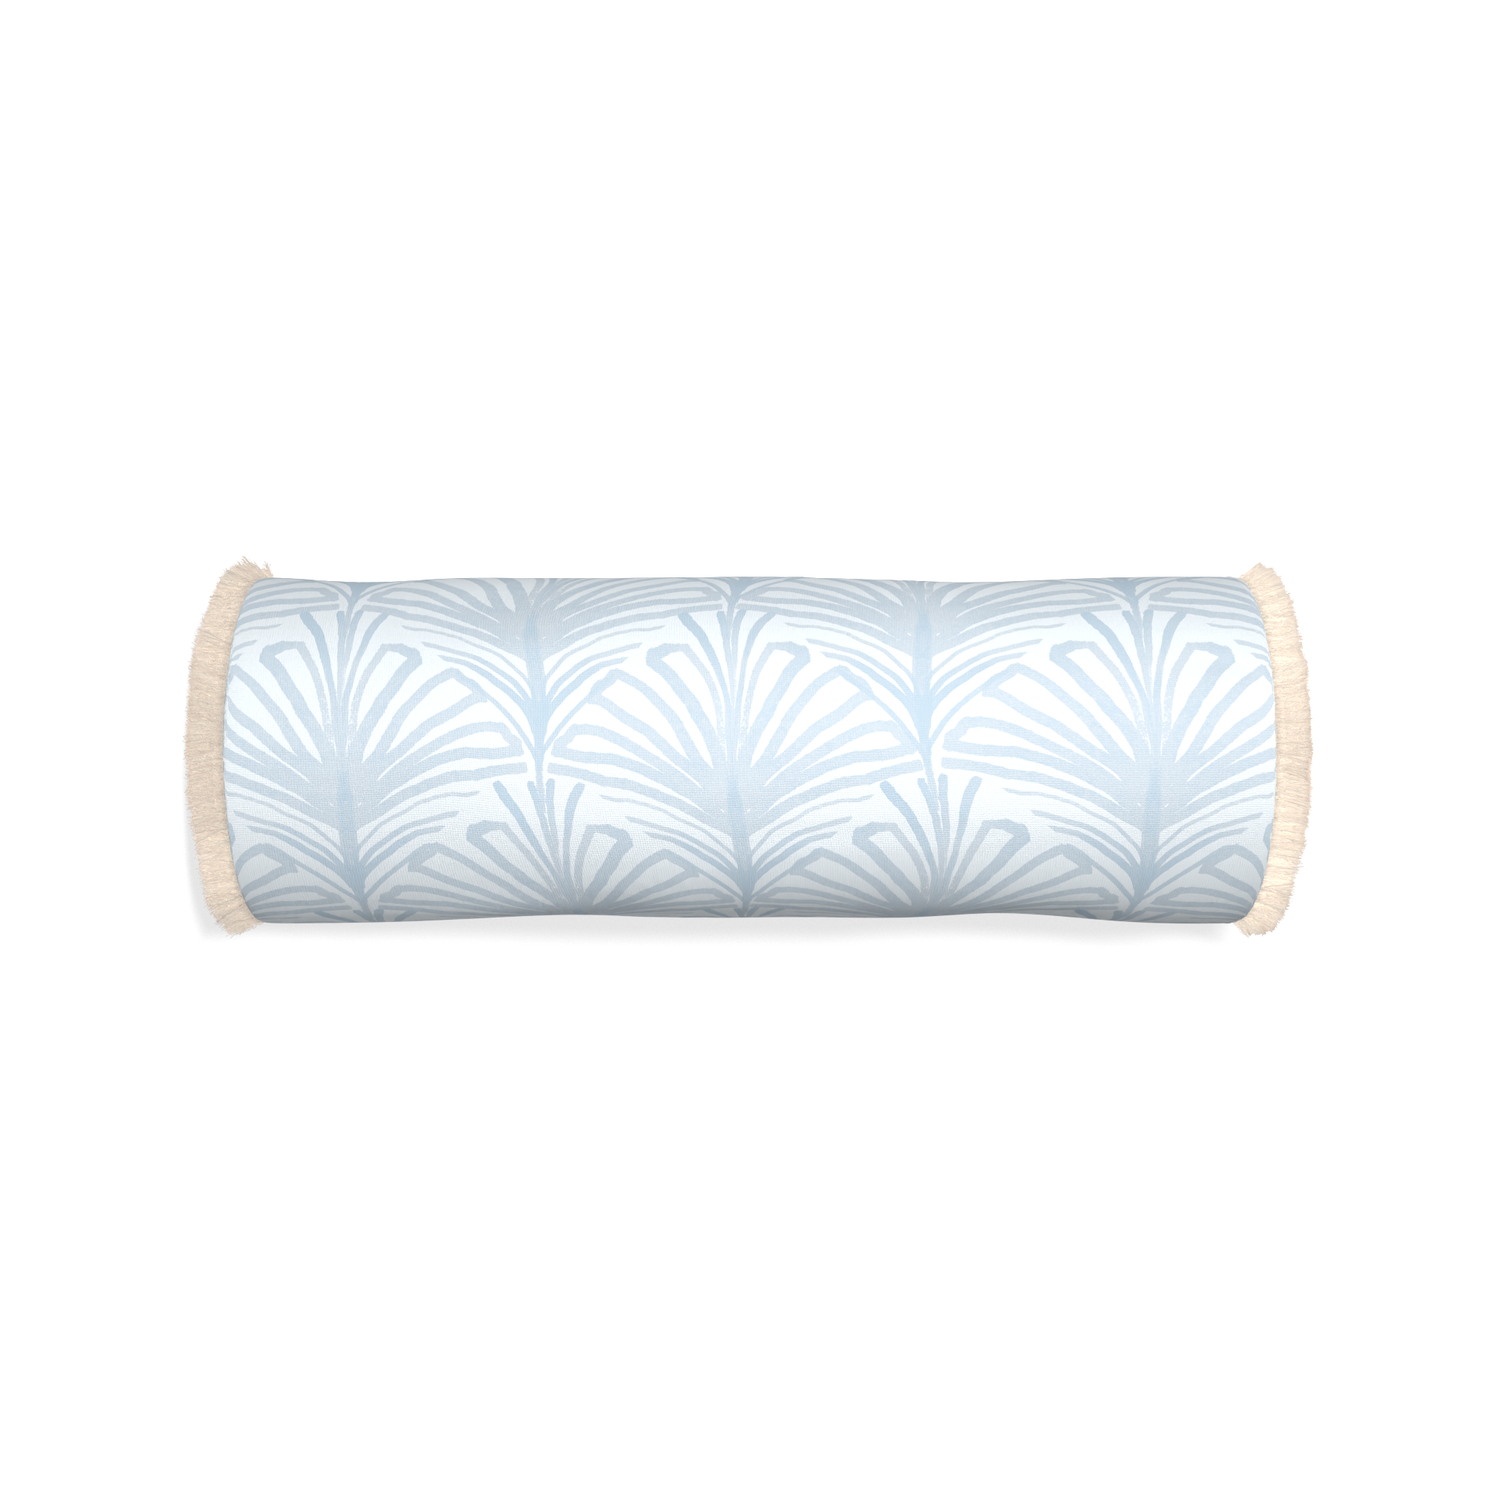 Bolster suzy sky custom sky blue palmpillow with cream fringe on white background